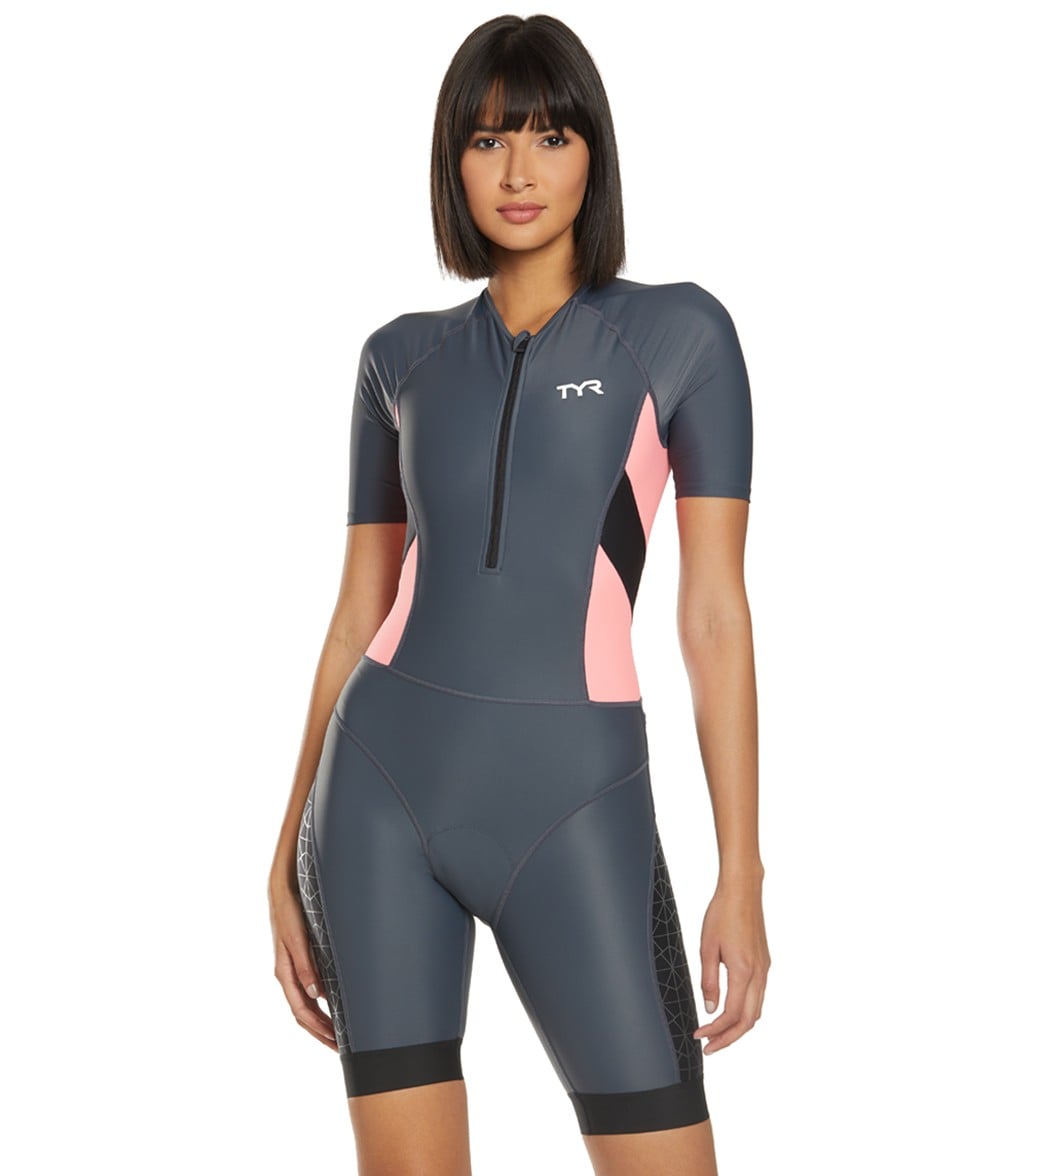 TYR Women's Competitor Speedsuit at SwimOutlet.com